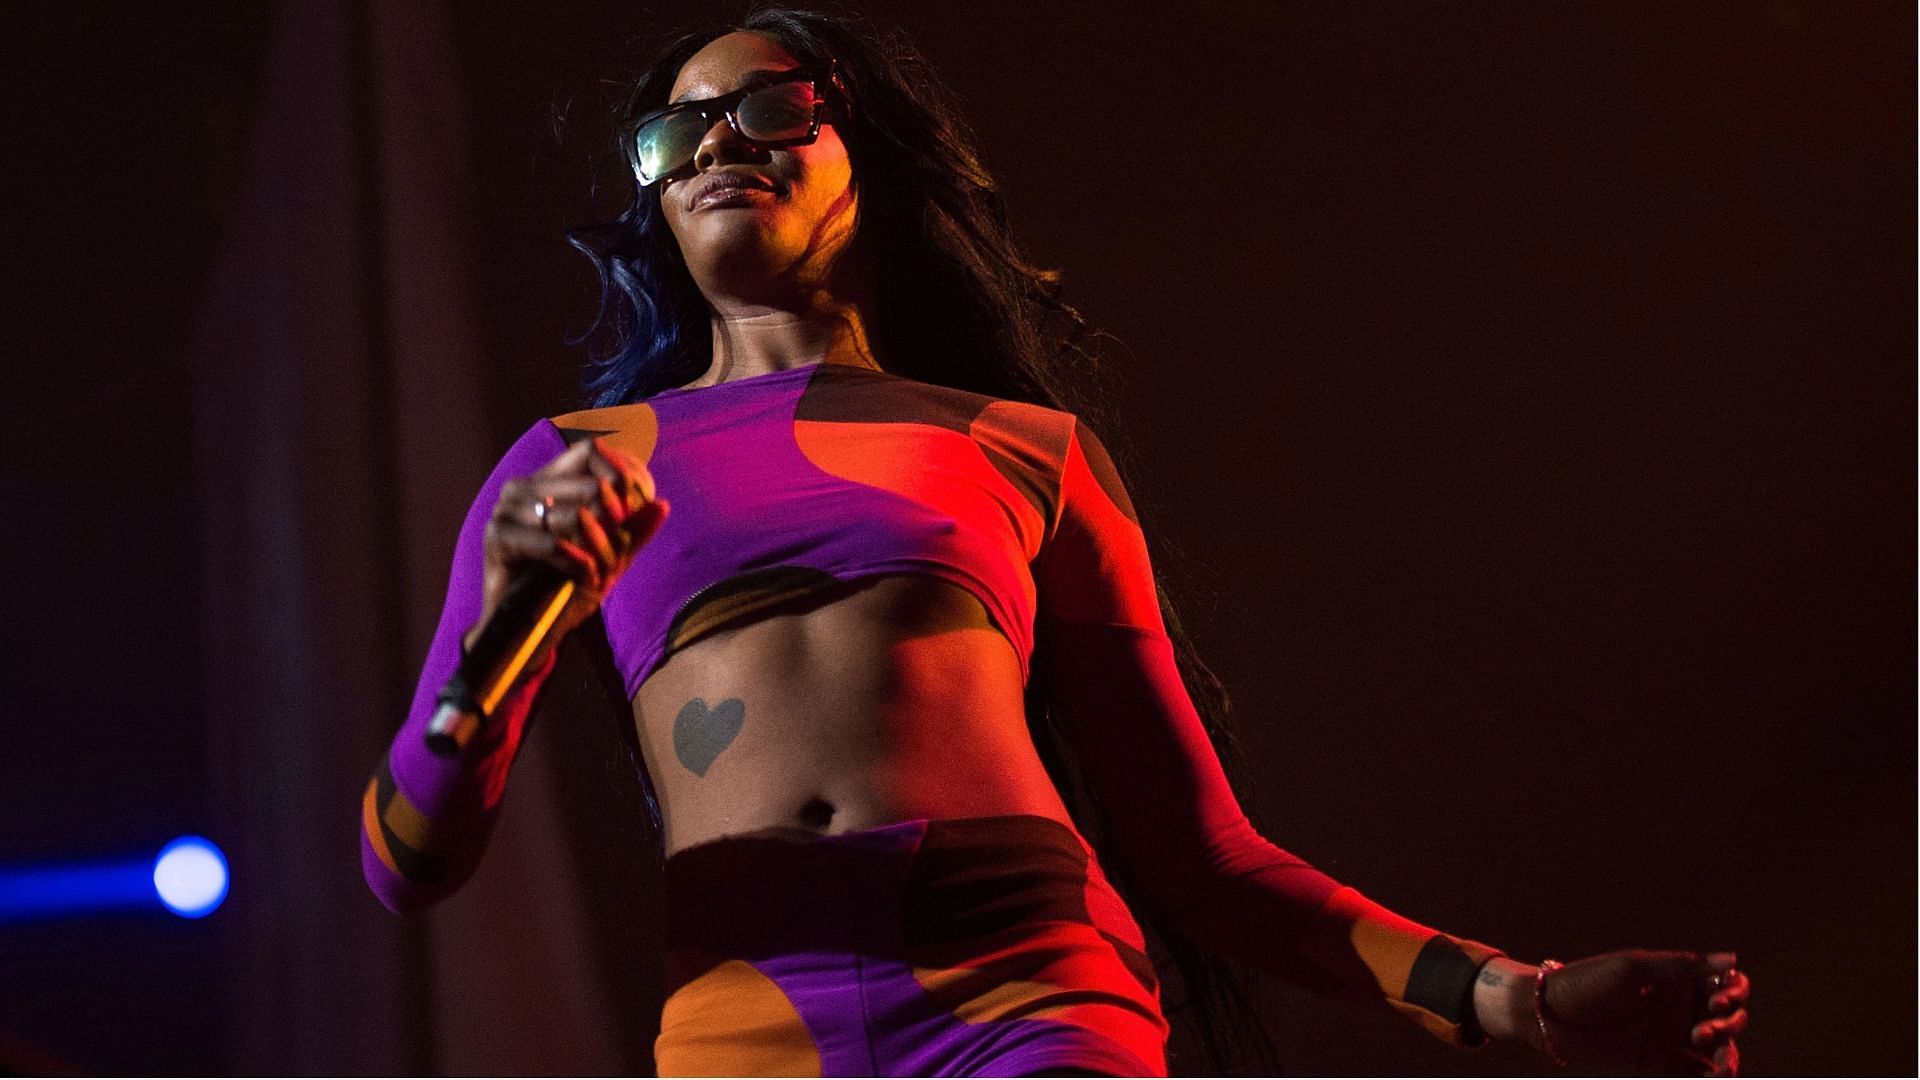 Azealia Banks has been called out several times for being homophobic and transphobic (Image via Getty Images/Cassandra Hannagan)